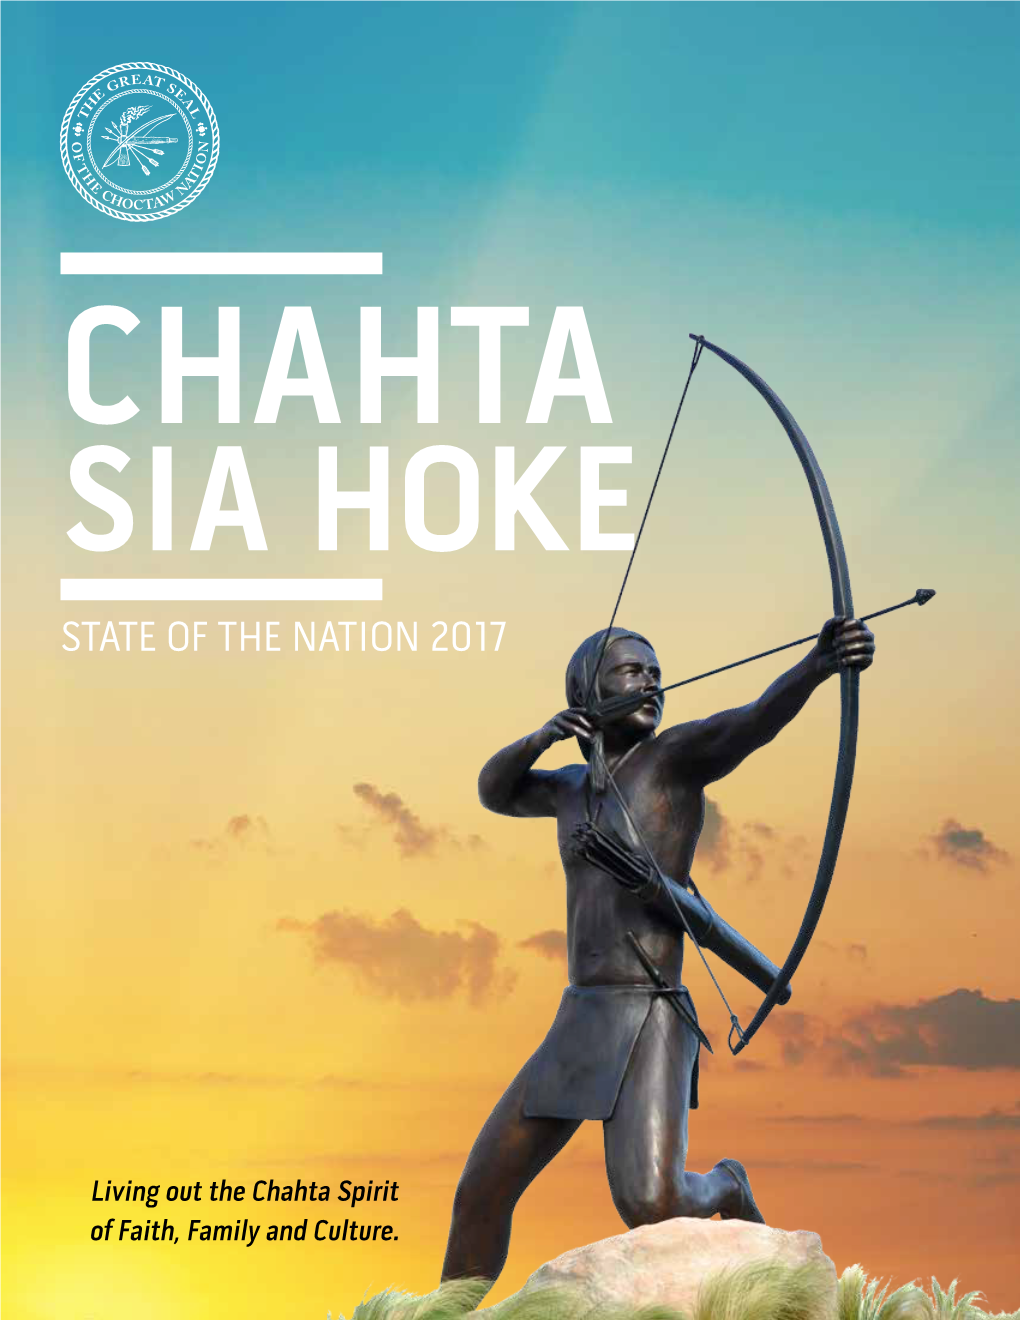 State of the Nation 2017 CHAHTA SIA HOKE STATE of the NATION 2017